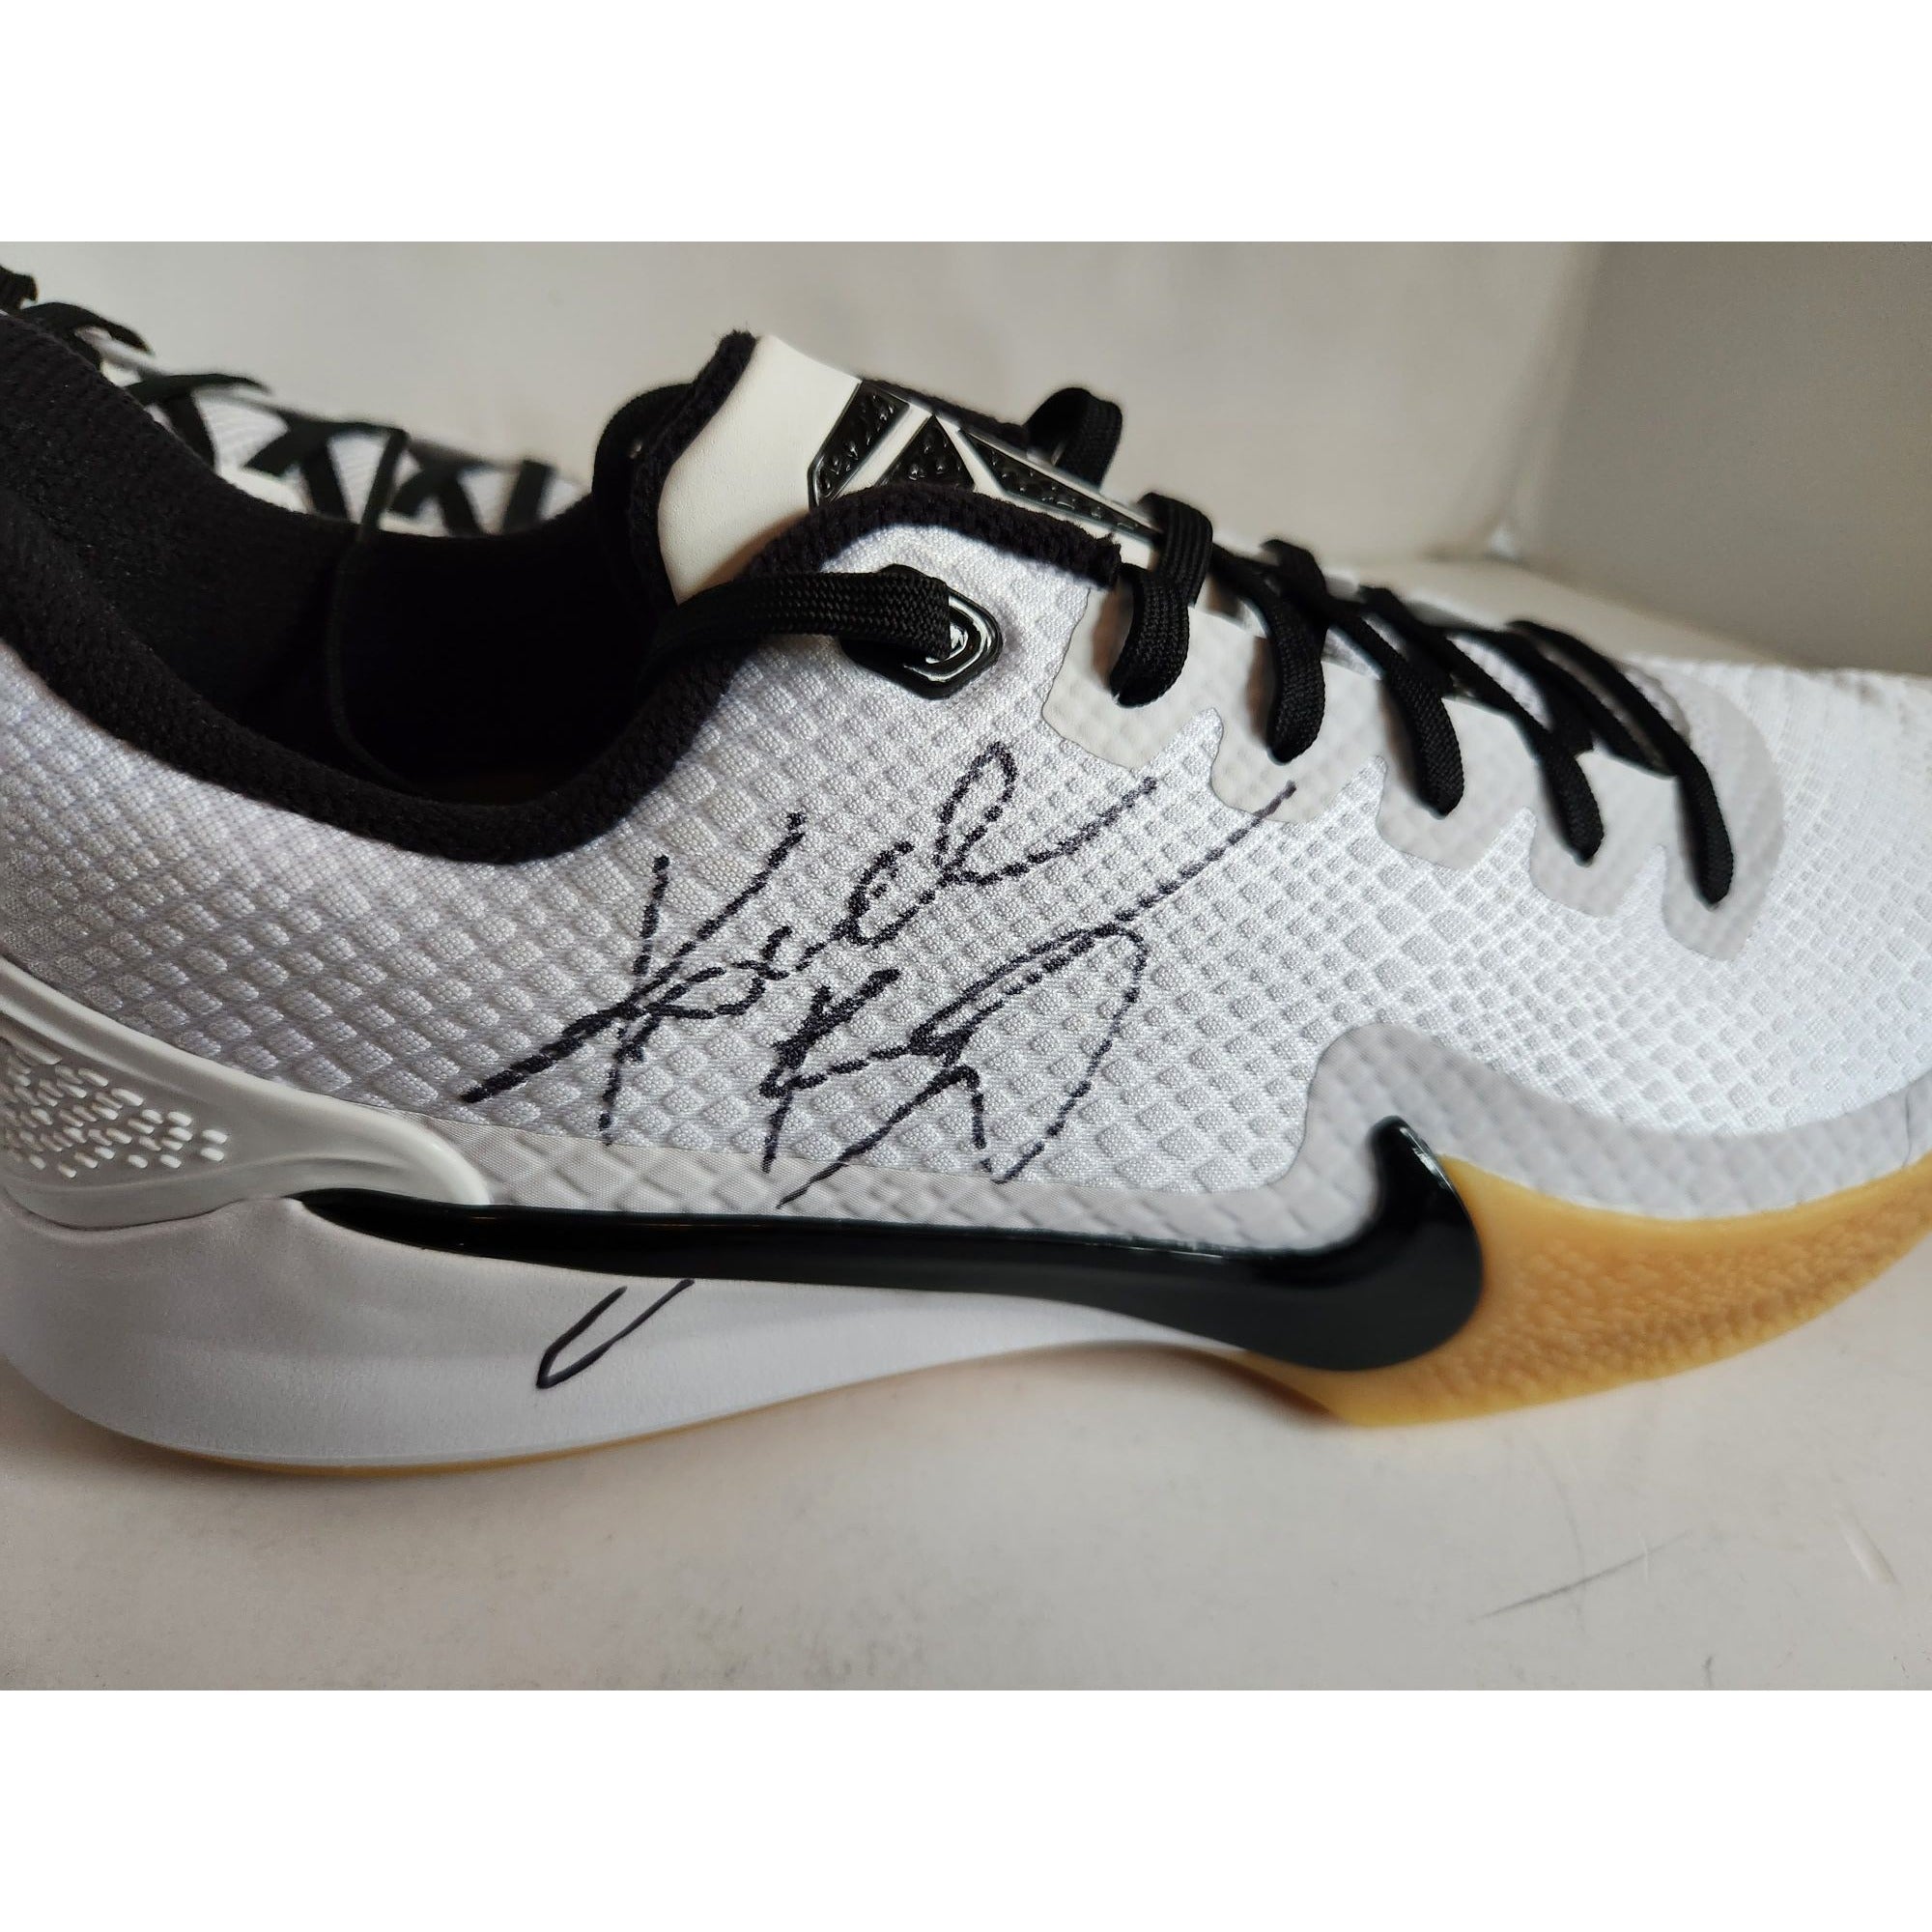 Kobe Bryant size 14 Los Angeles Lakers game mode Nike shoe signed with proof